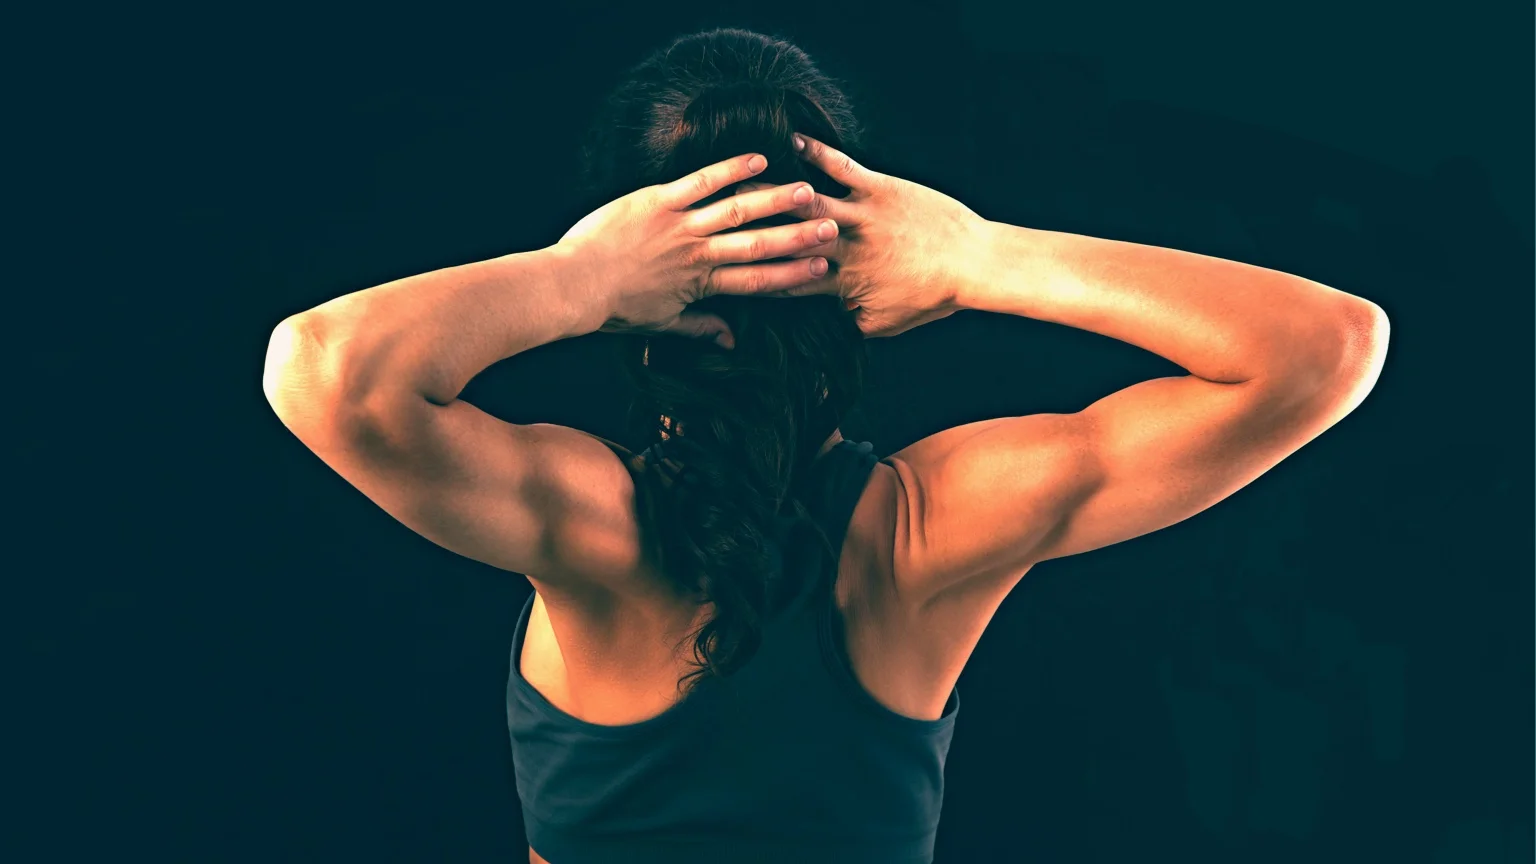 Woman squeezes her shoulder blades, performing exercises to strengthen rhomboids.